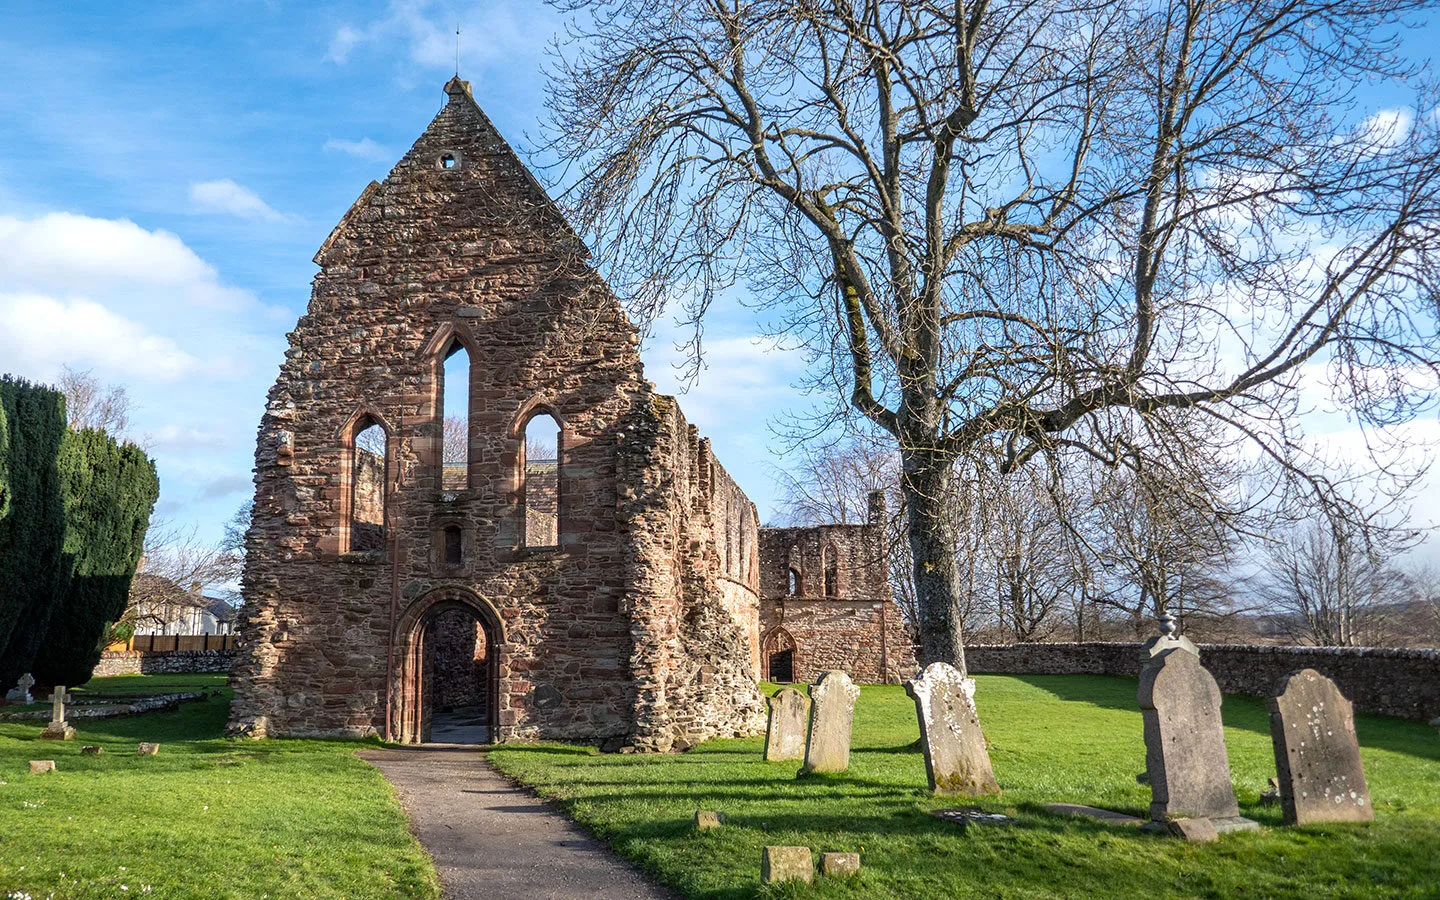 The ruins of Beauly Priory near Inverness